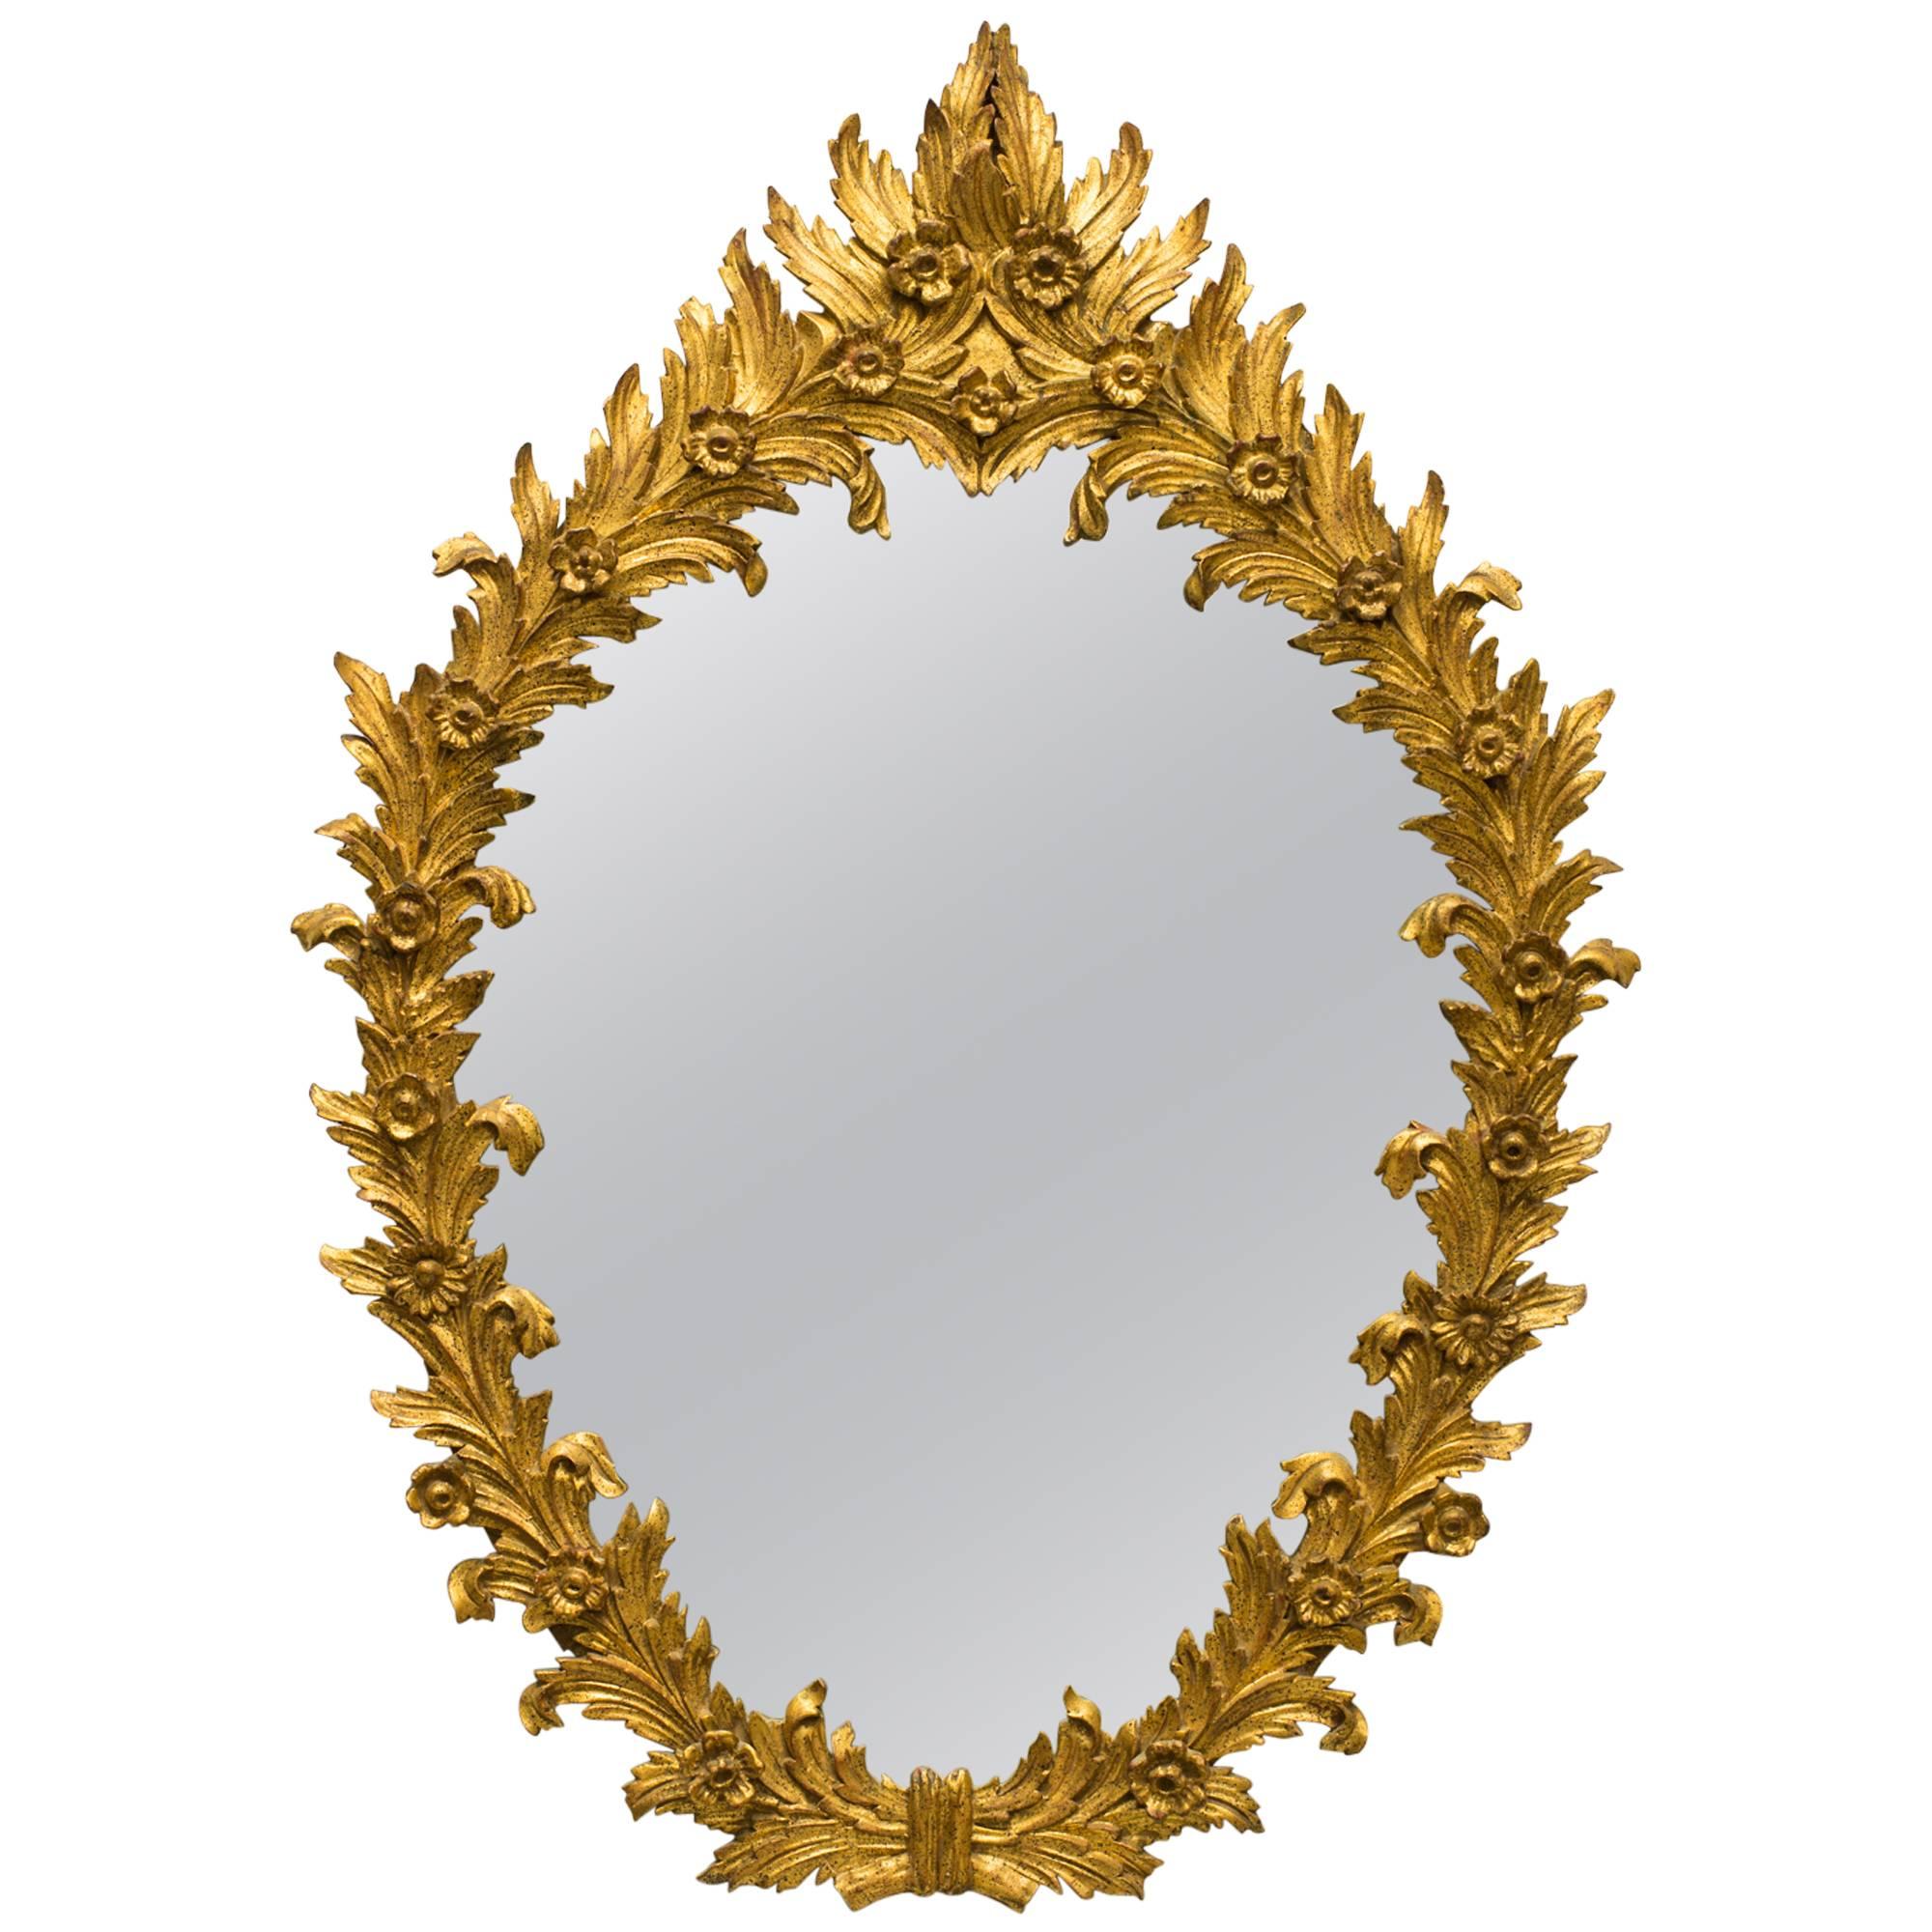 1960s Italian Carved Wood Floral Gilt Mirror